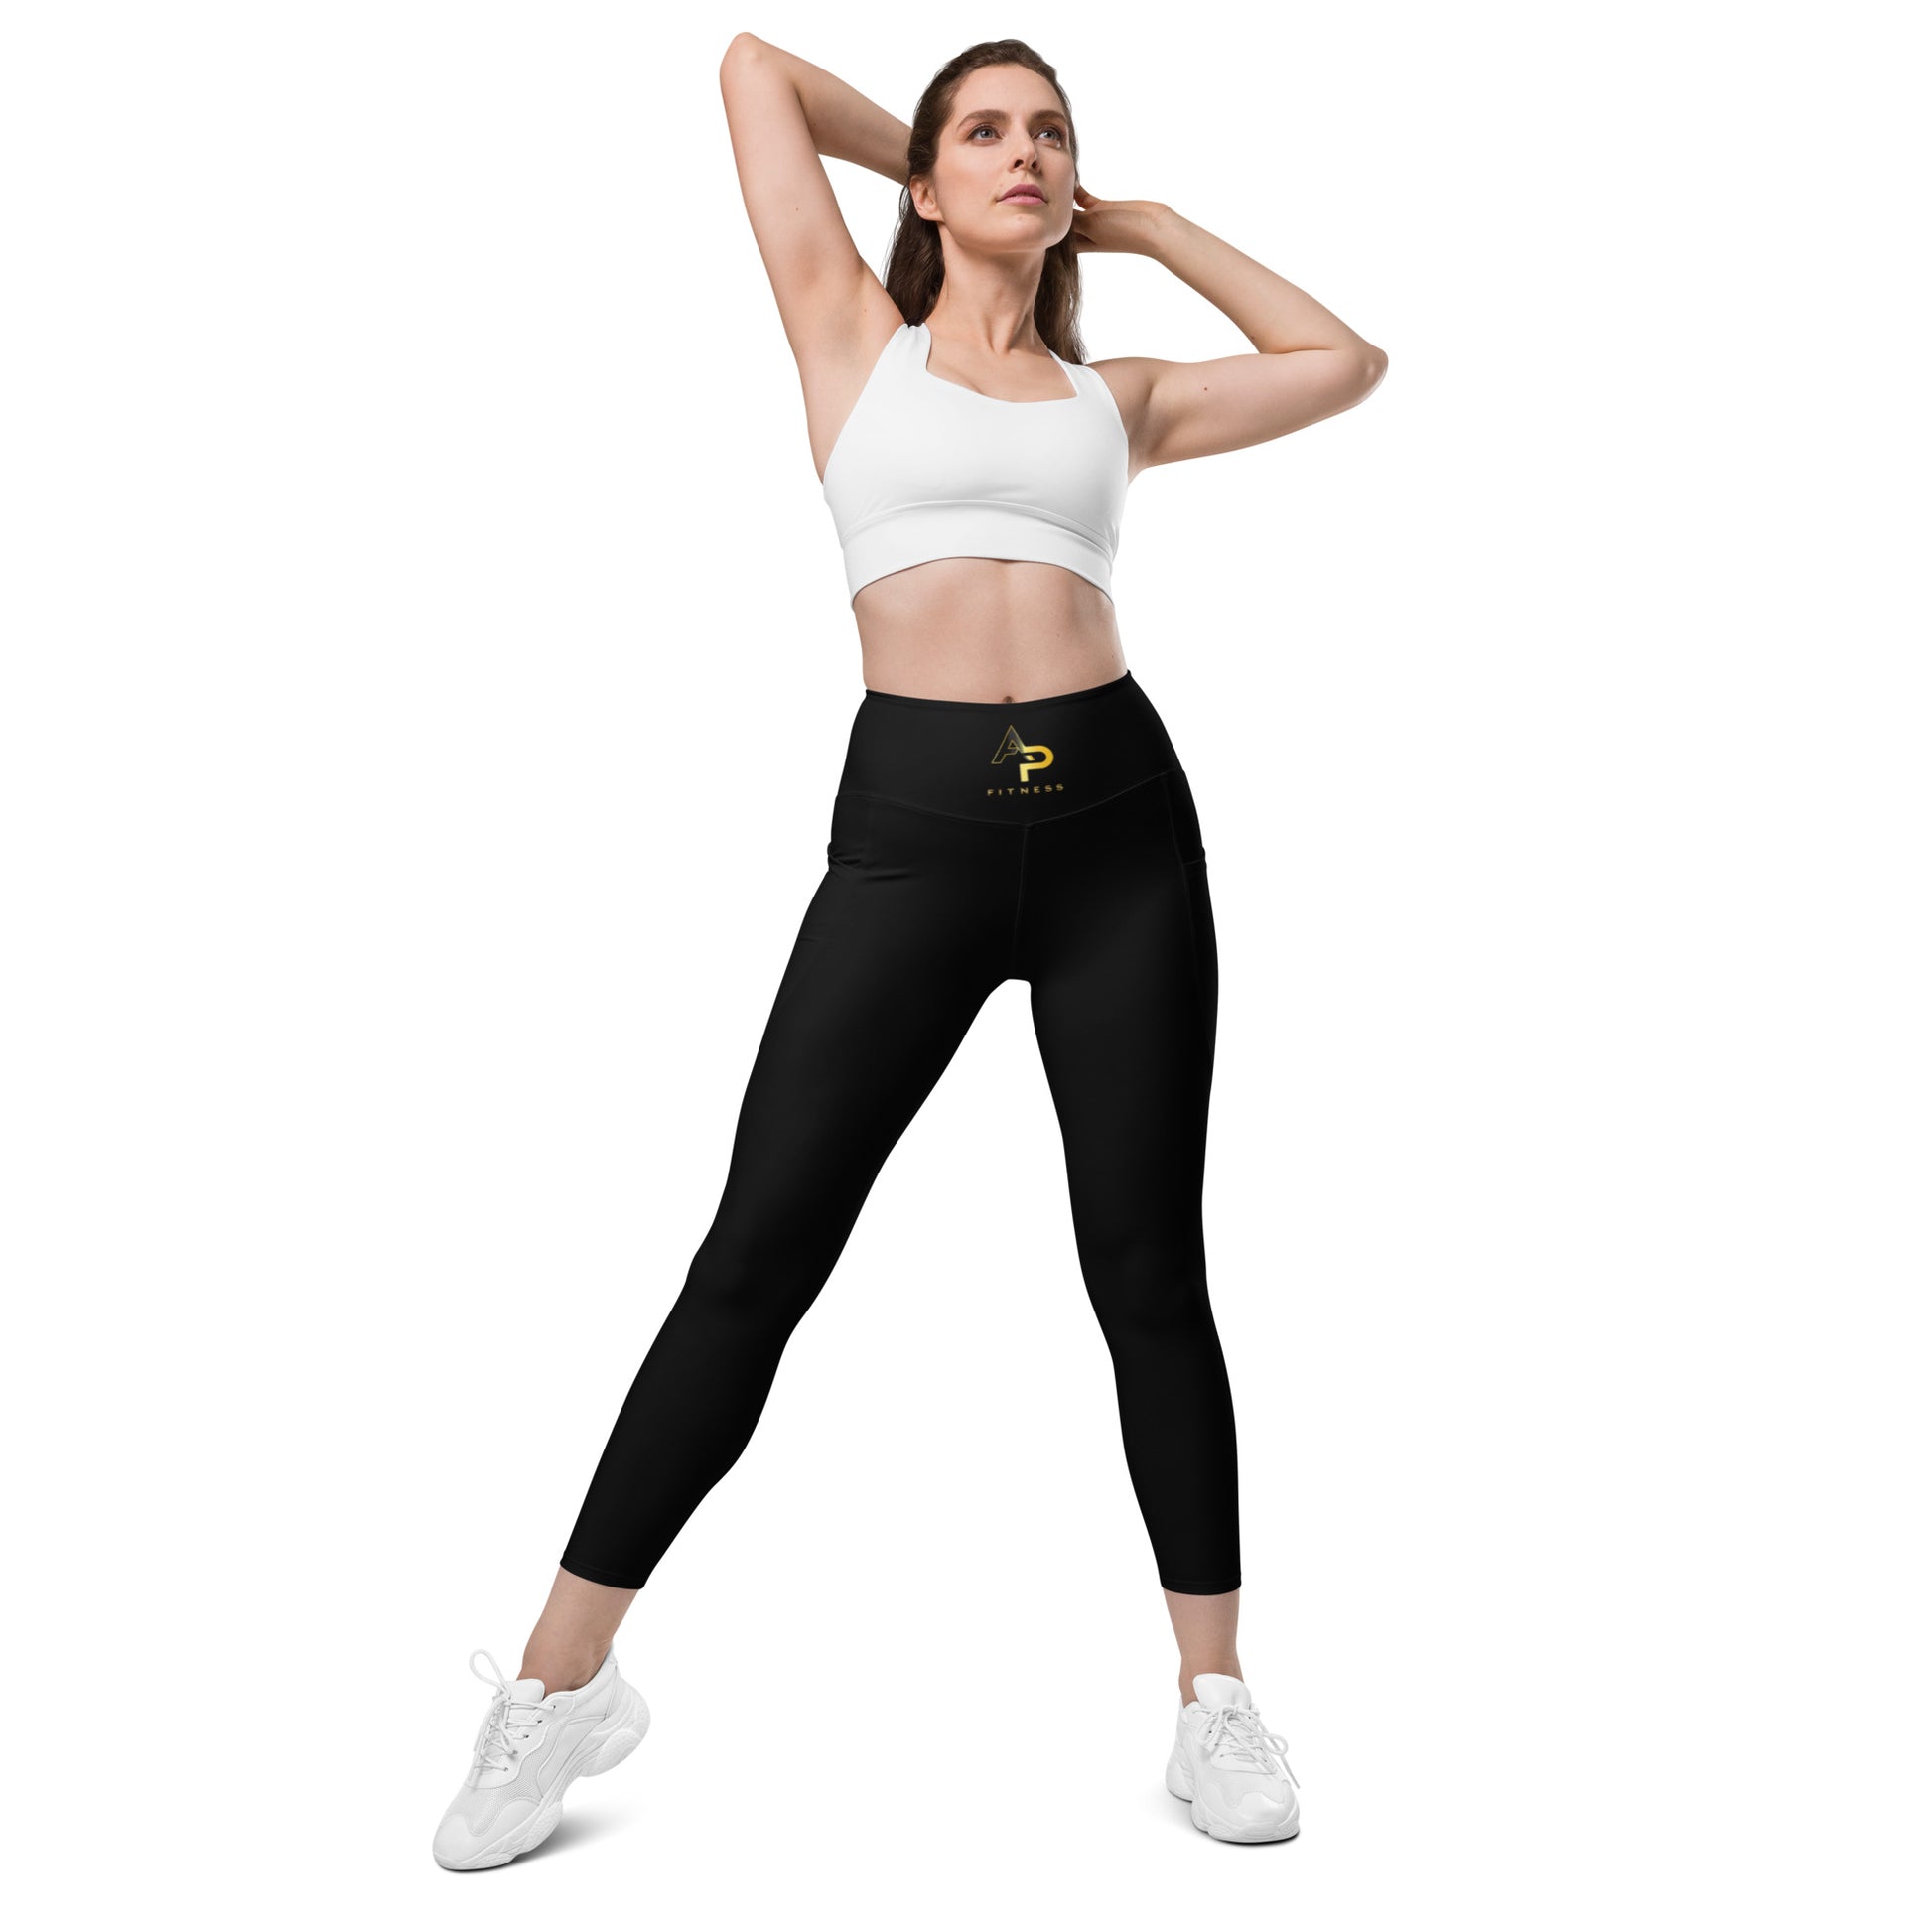 AP Fitness Leggings with pockets – Apply Pressure Fitness